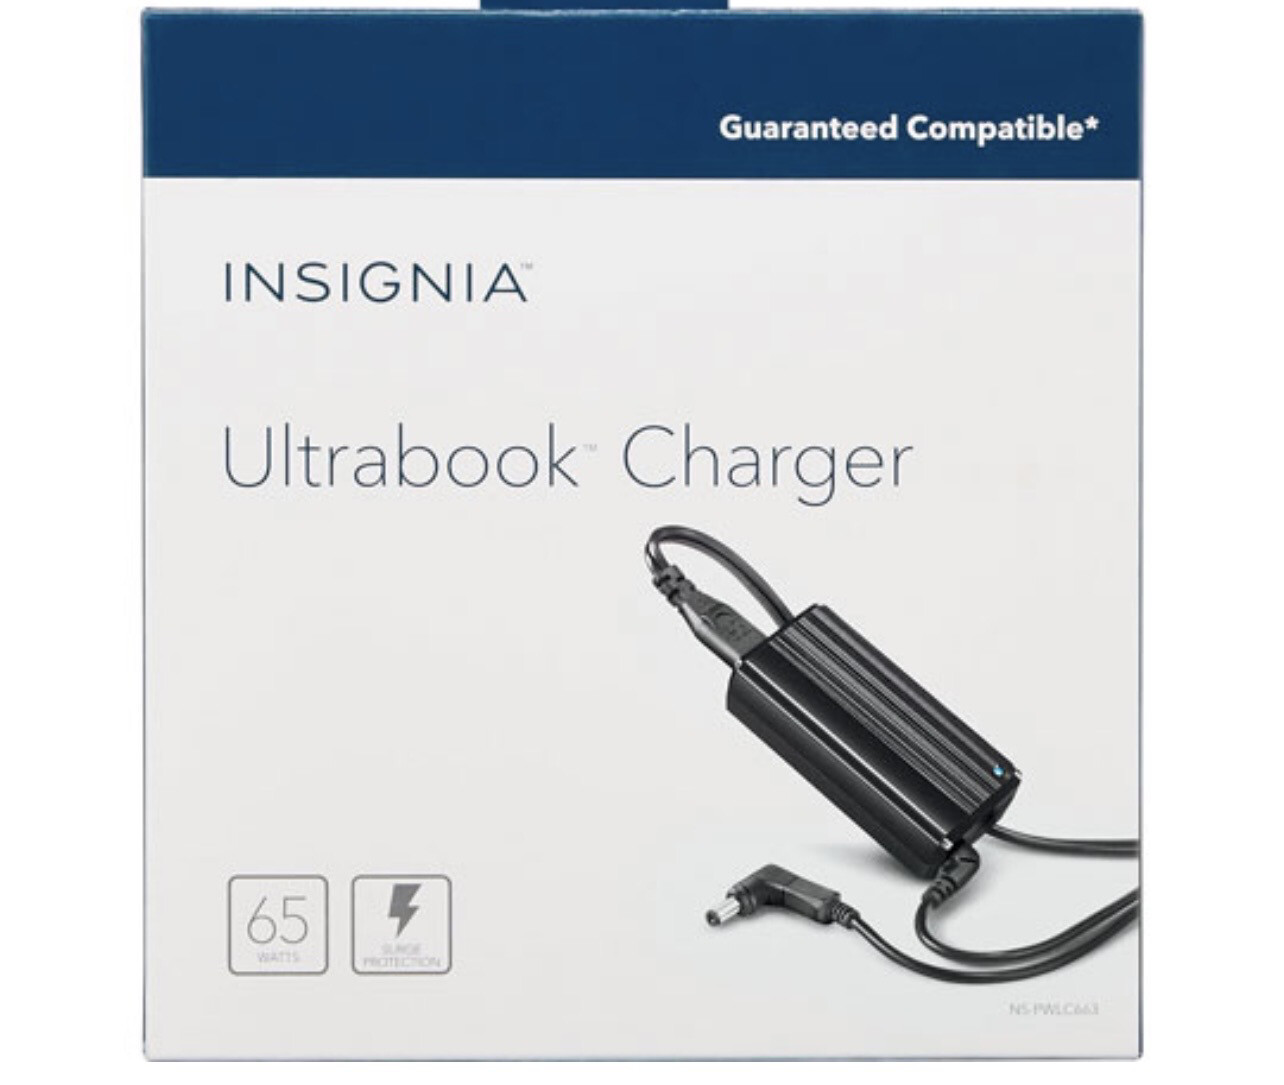 Insignia 65W Universal Ultrabook Laptop Charger (NS-PWLC663-C) - Black